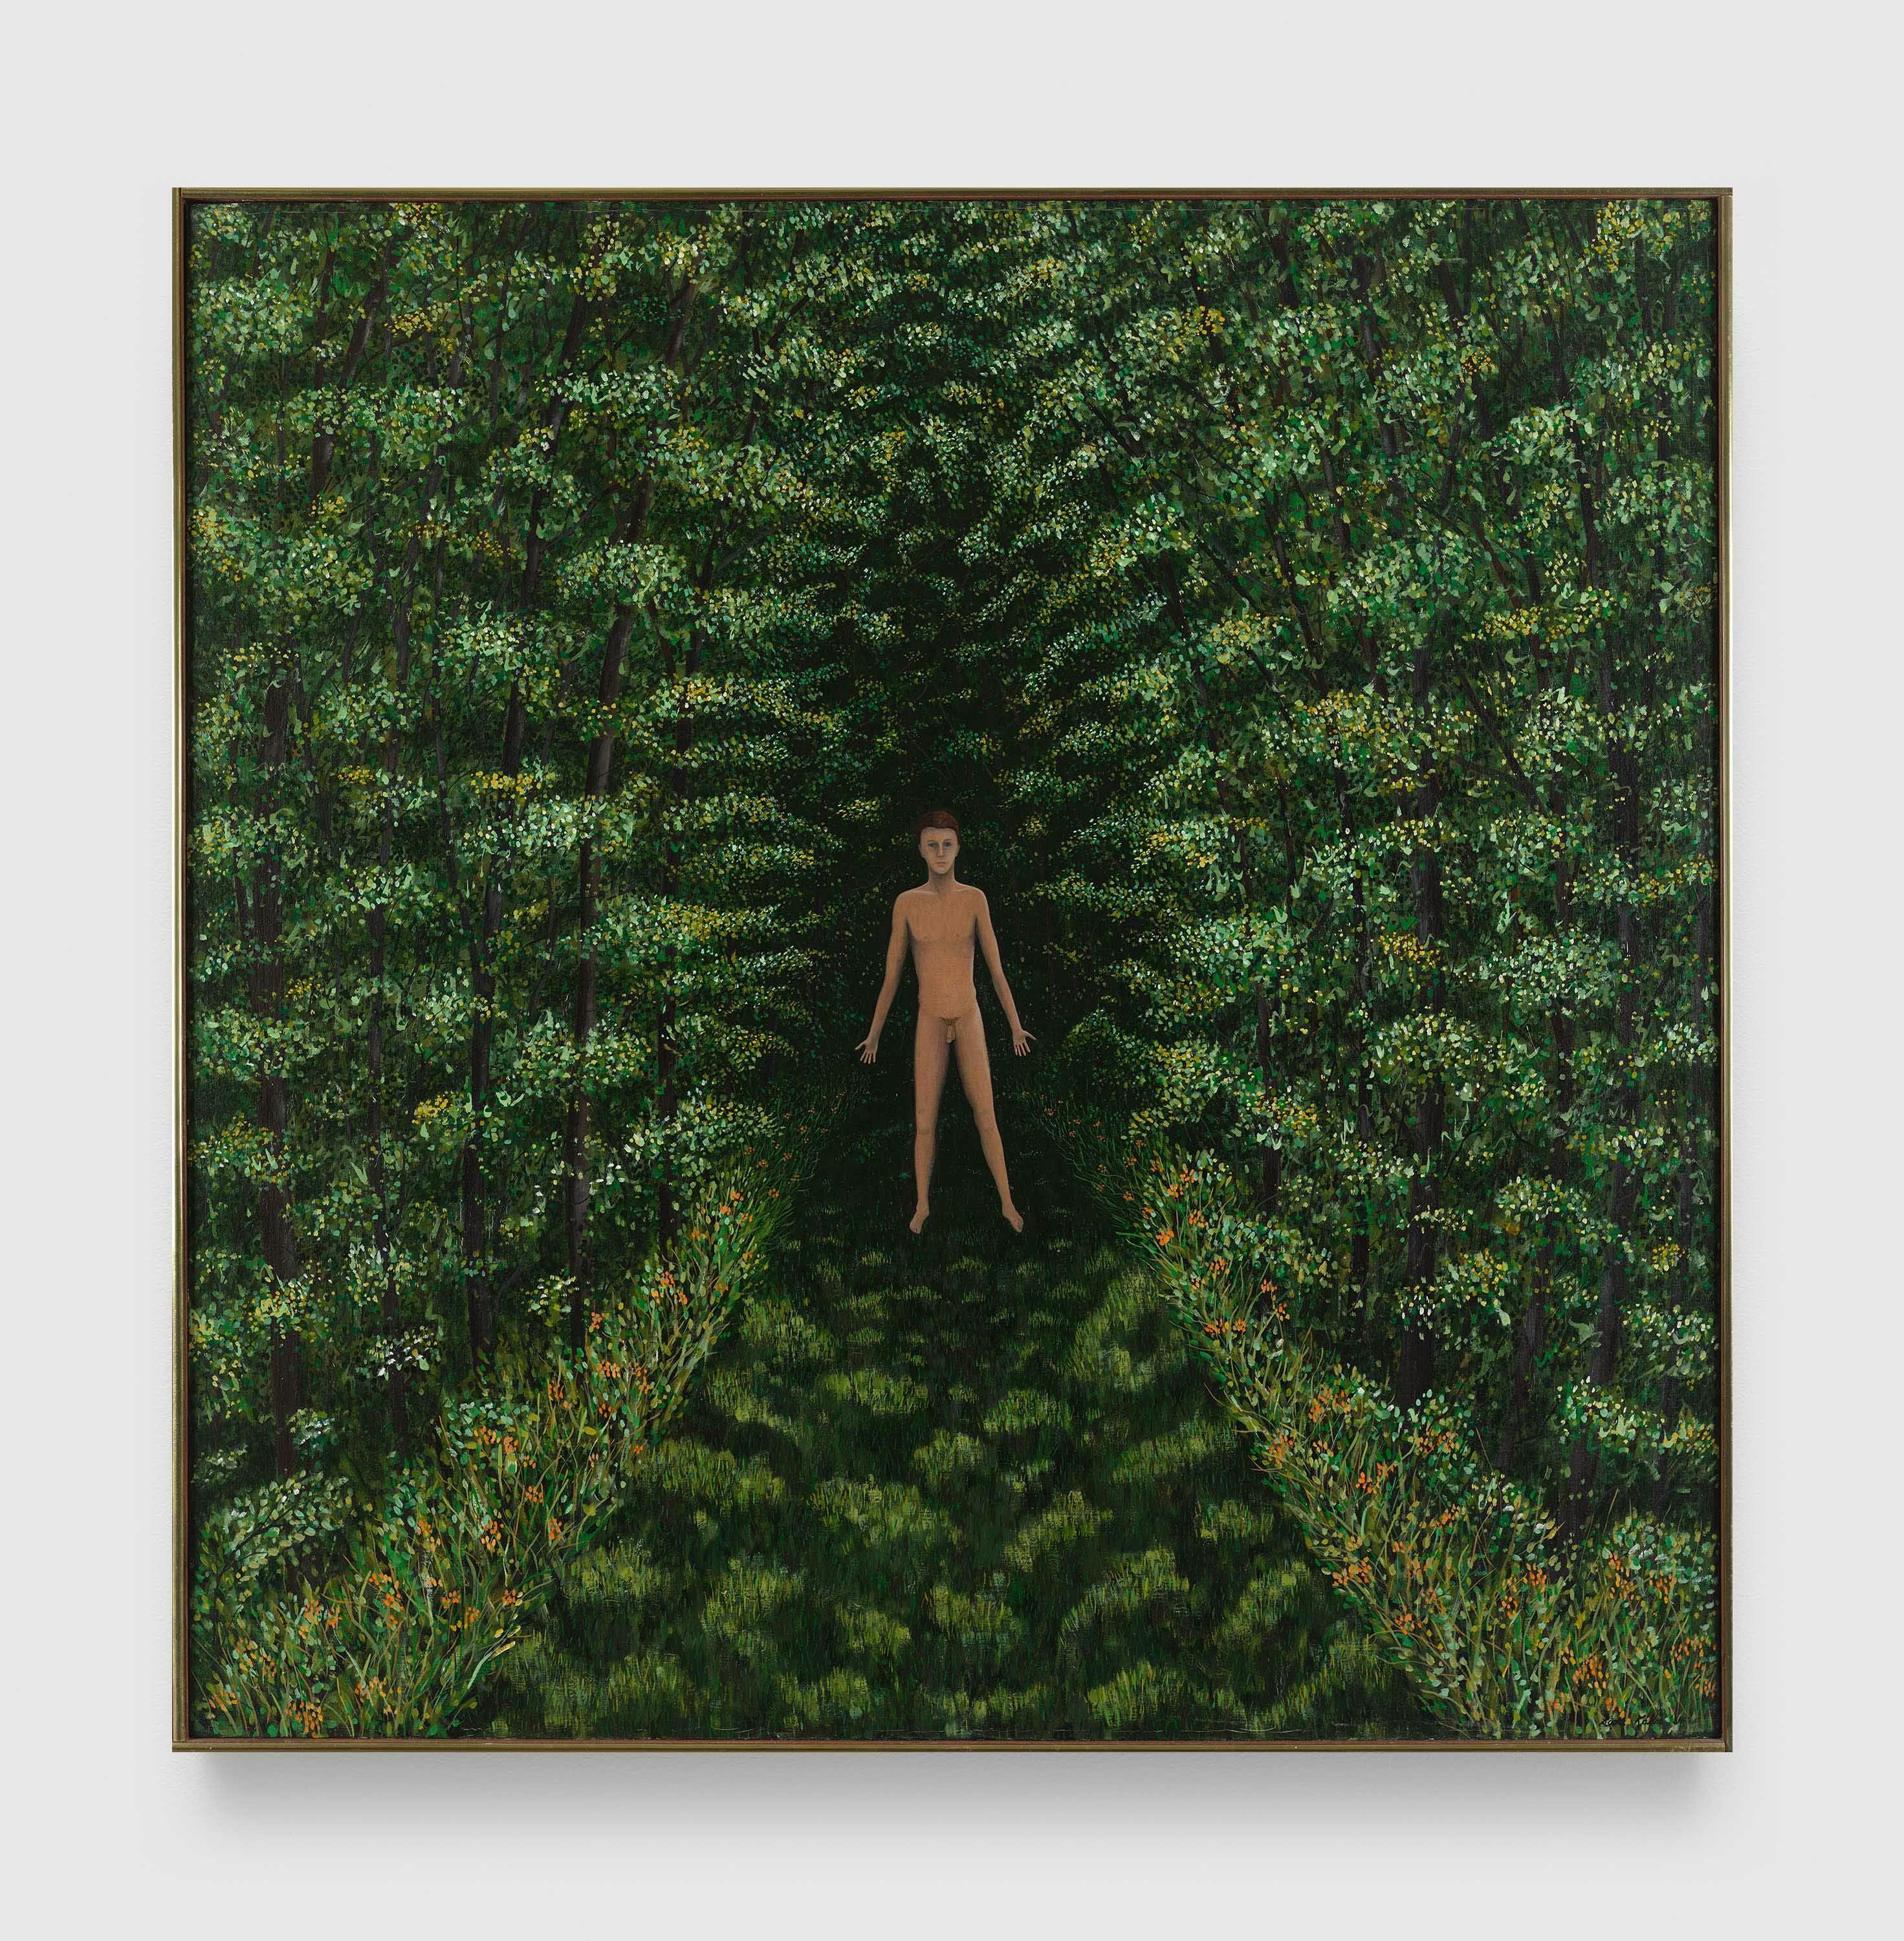 A painting by Scott Kahn, titled On the Path, dated 1984.